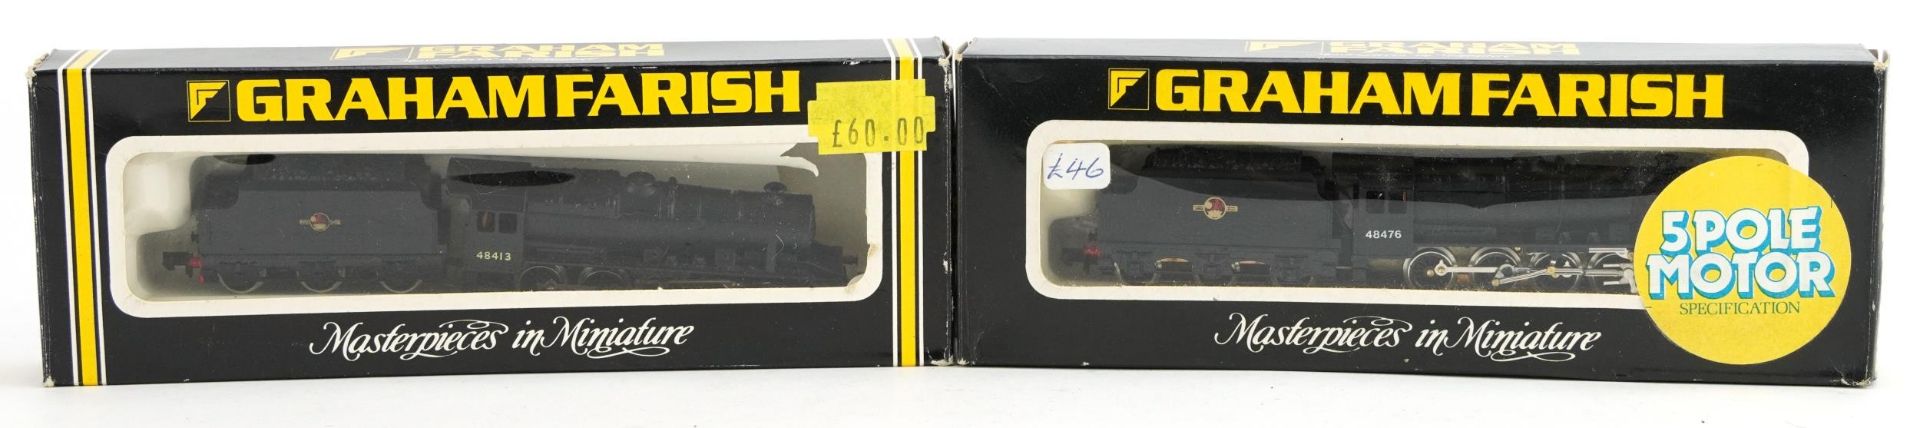 Two Graham Farish N gauge model railway locomotives with tenders and cases, number 1905 the other